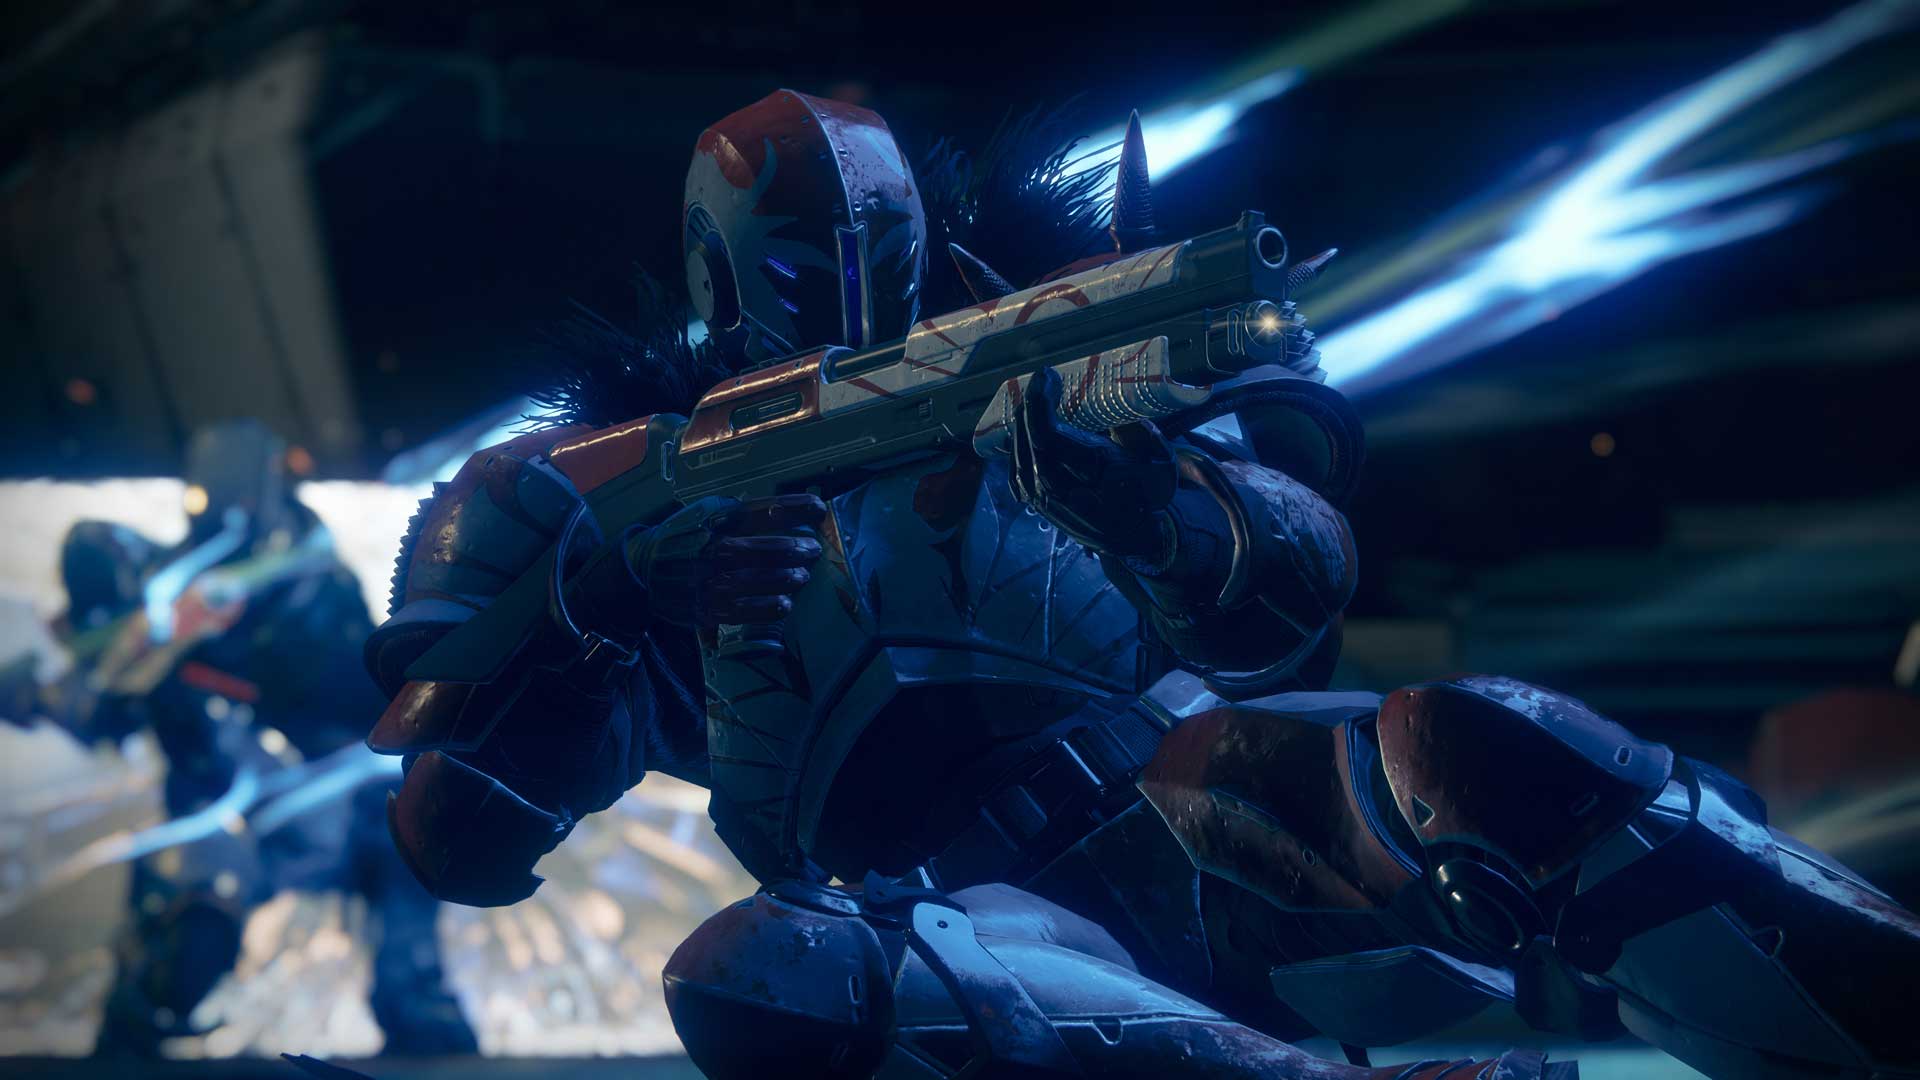 Twitch Prime Delivers Five New Games and Exotic Destiny 2 Loot